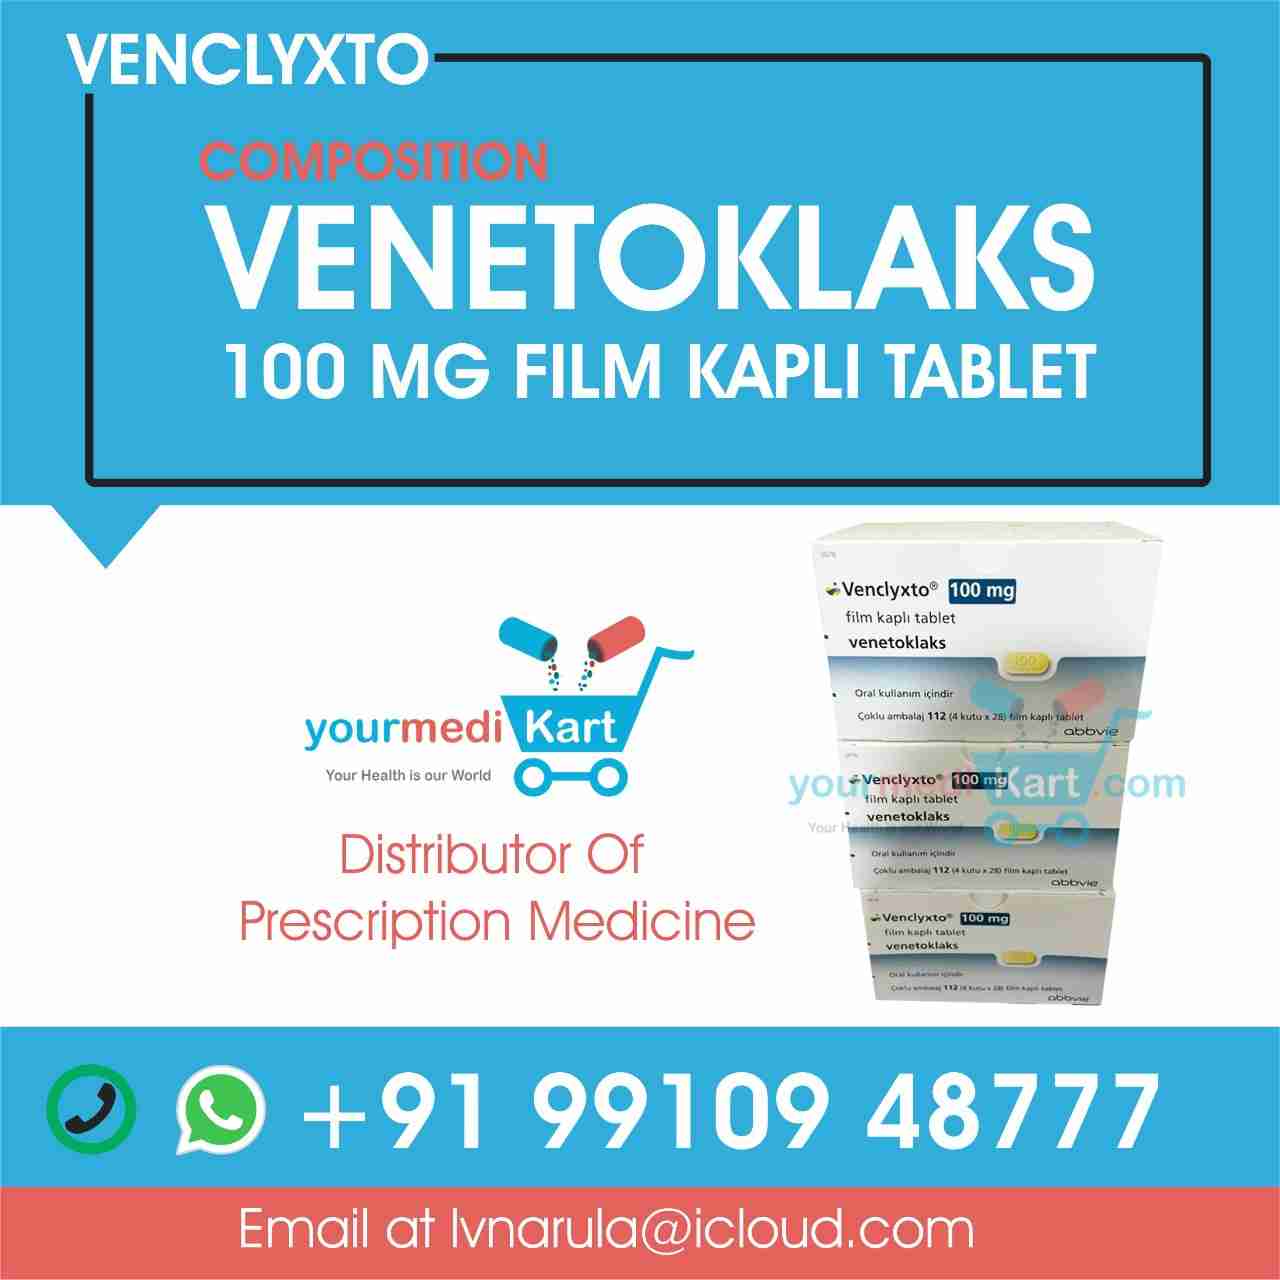 Best Venclyxto / venetoclax 100 mg tablet price online | treat types of cancer Get venetoklaks/ Venclyxto price in india at bargain price